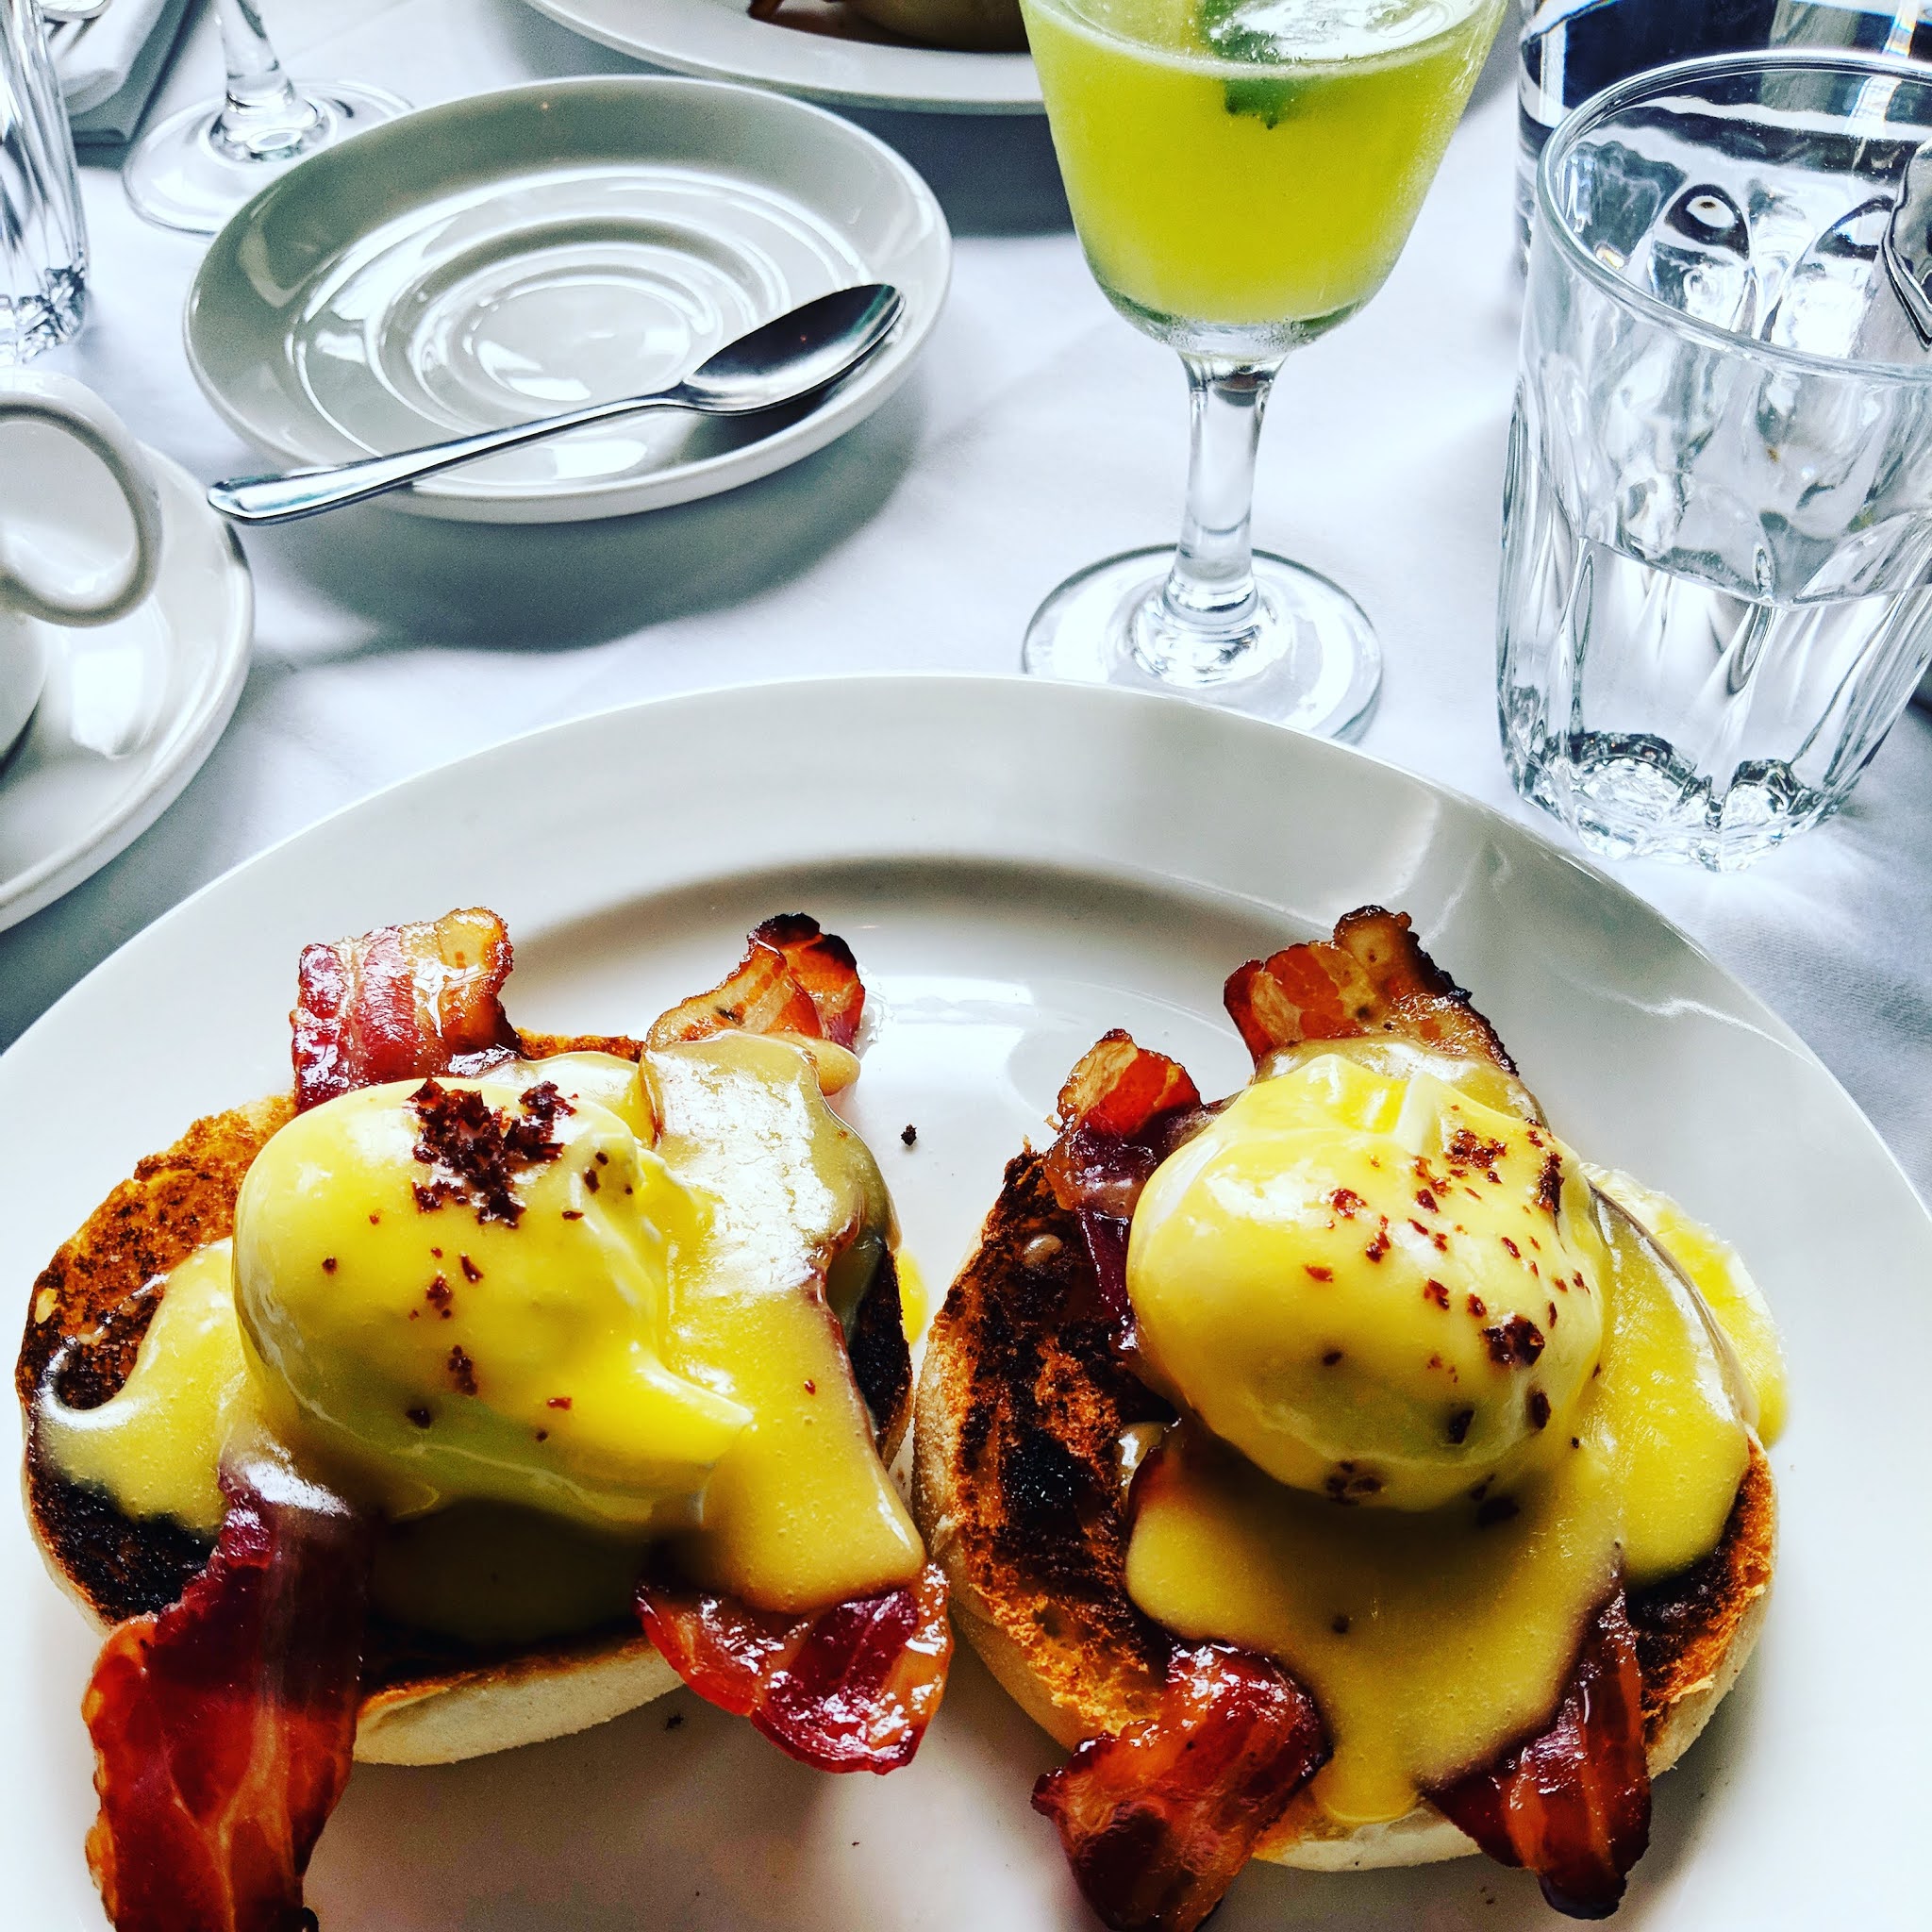 Maple Candied Bacon Benedict at Bistrotheque, one of the best East London breakfast spots